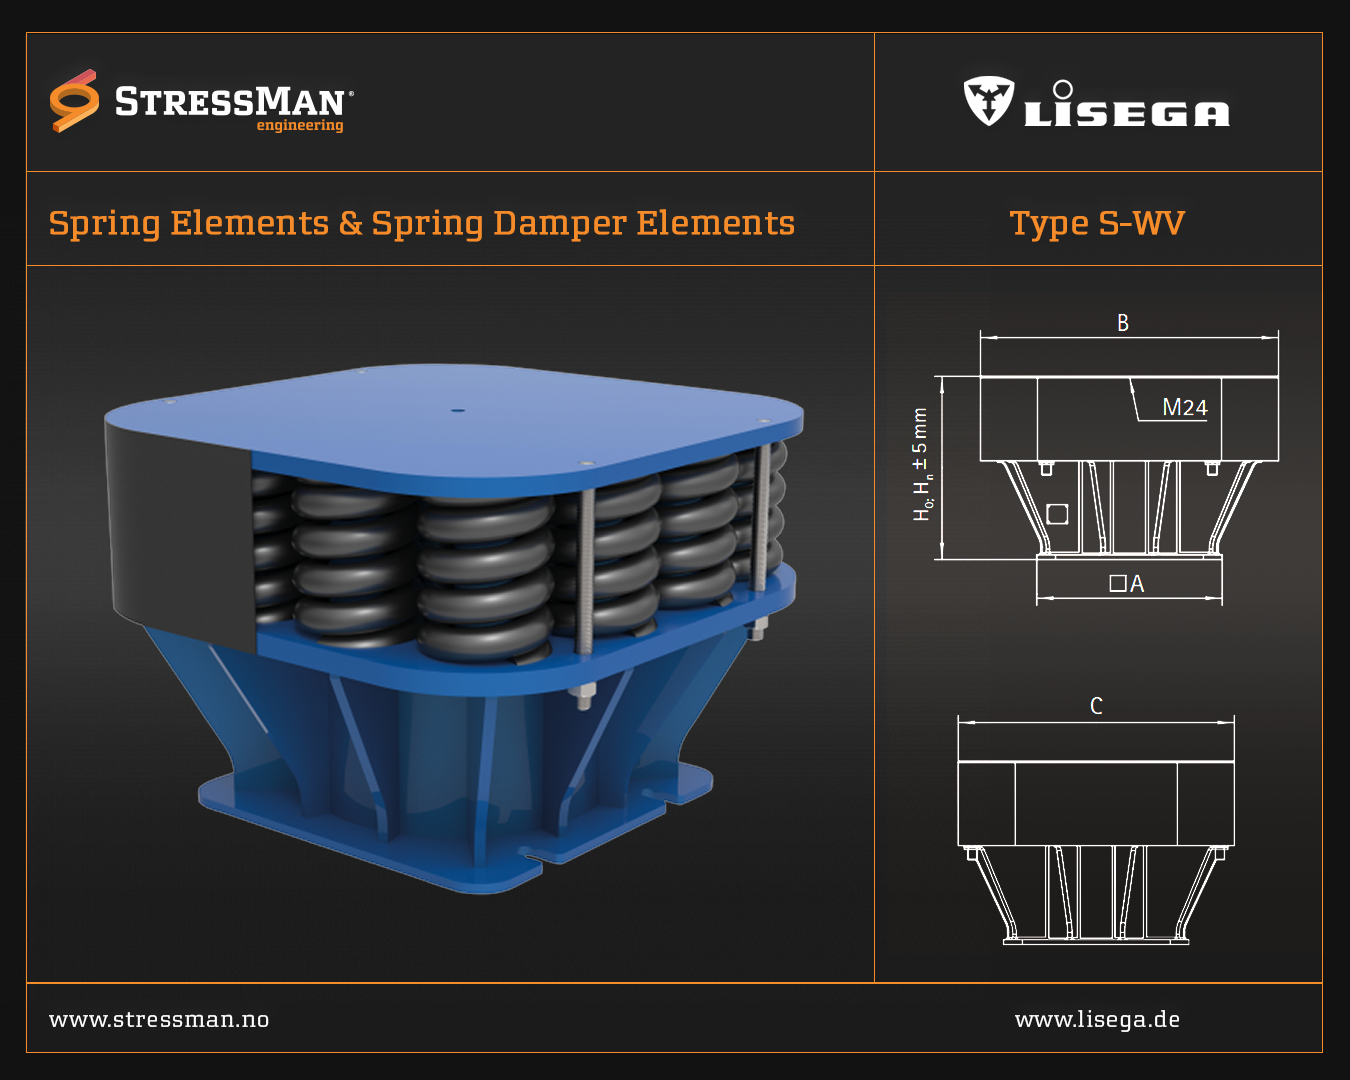 Spring Elements and Spring Damper Elements: Reducing Vibrations in Industrial Applications